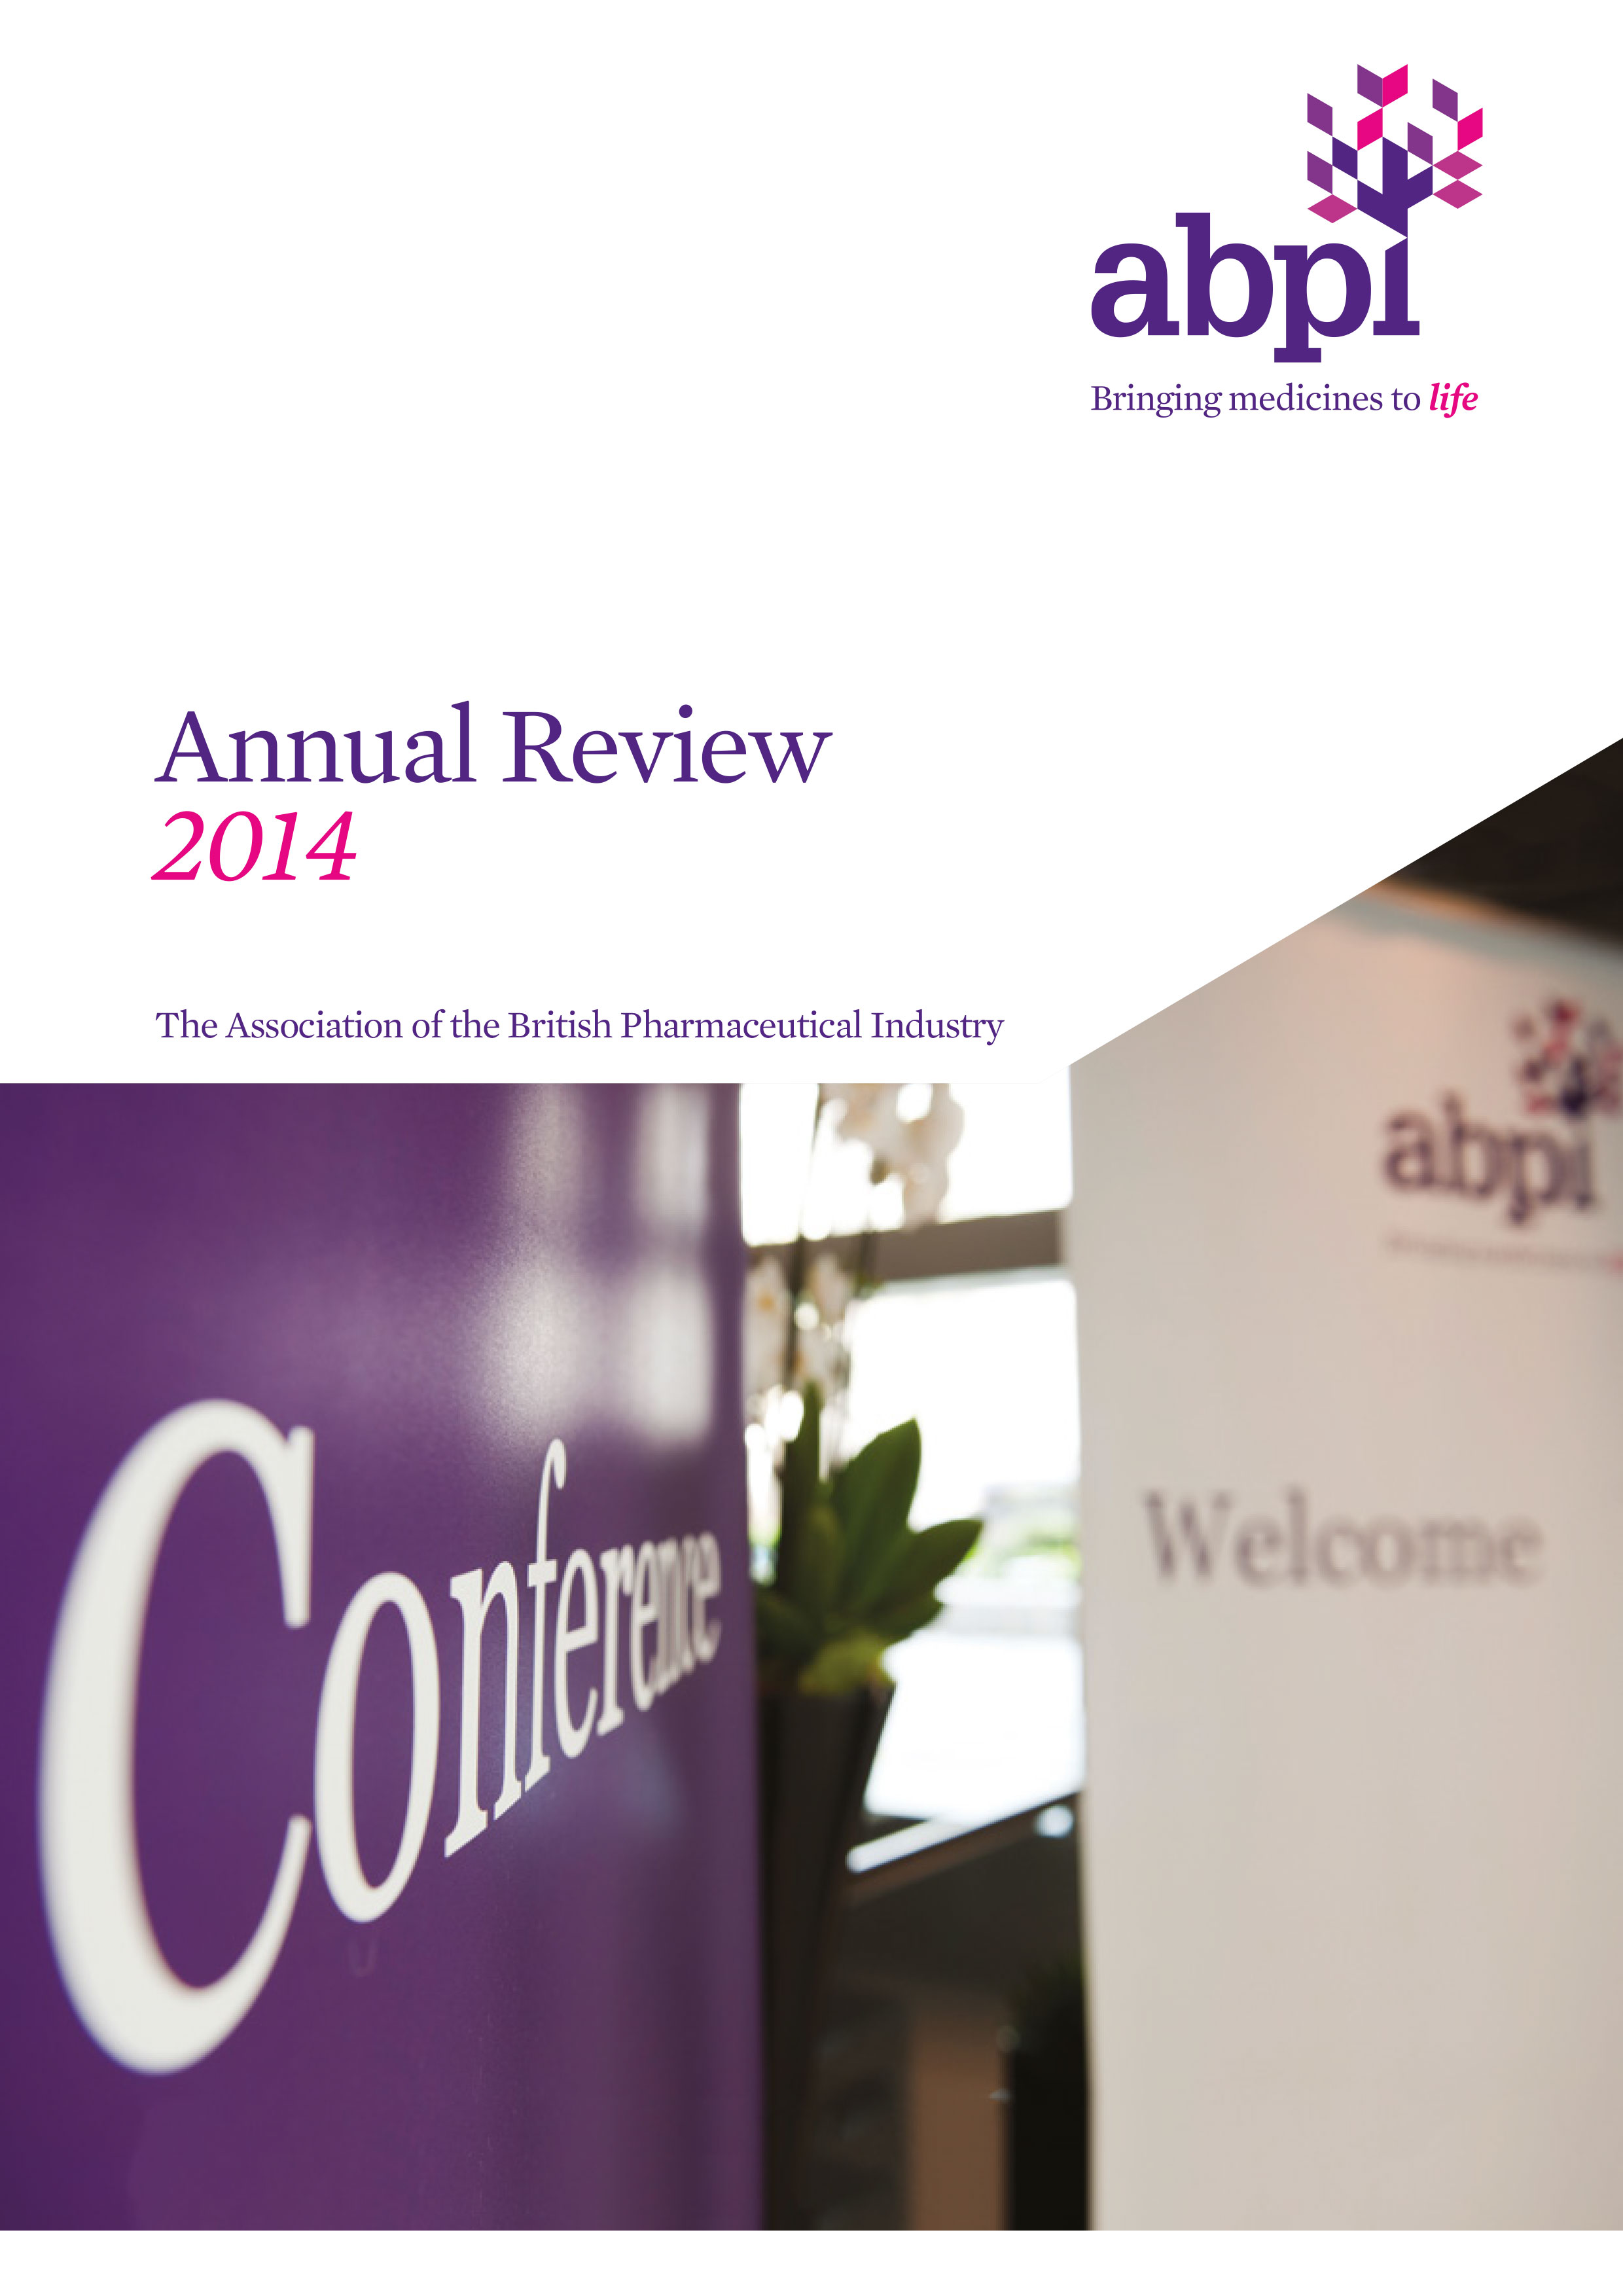 ABPI Annual Review 2014